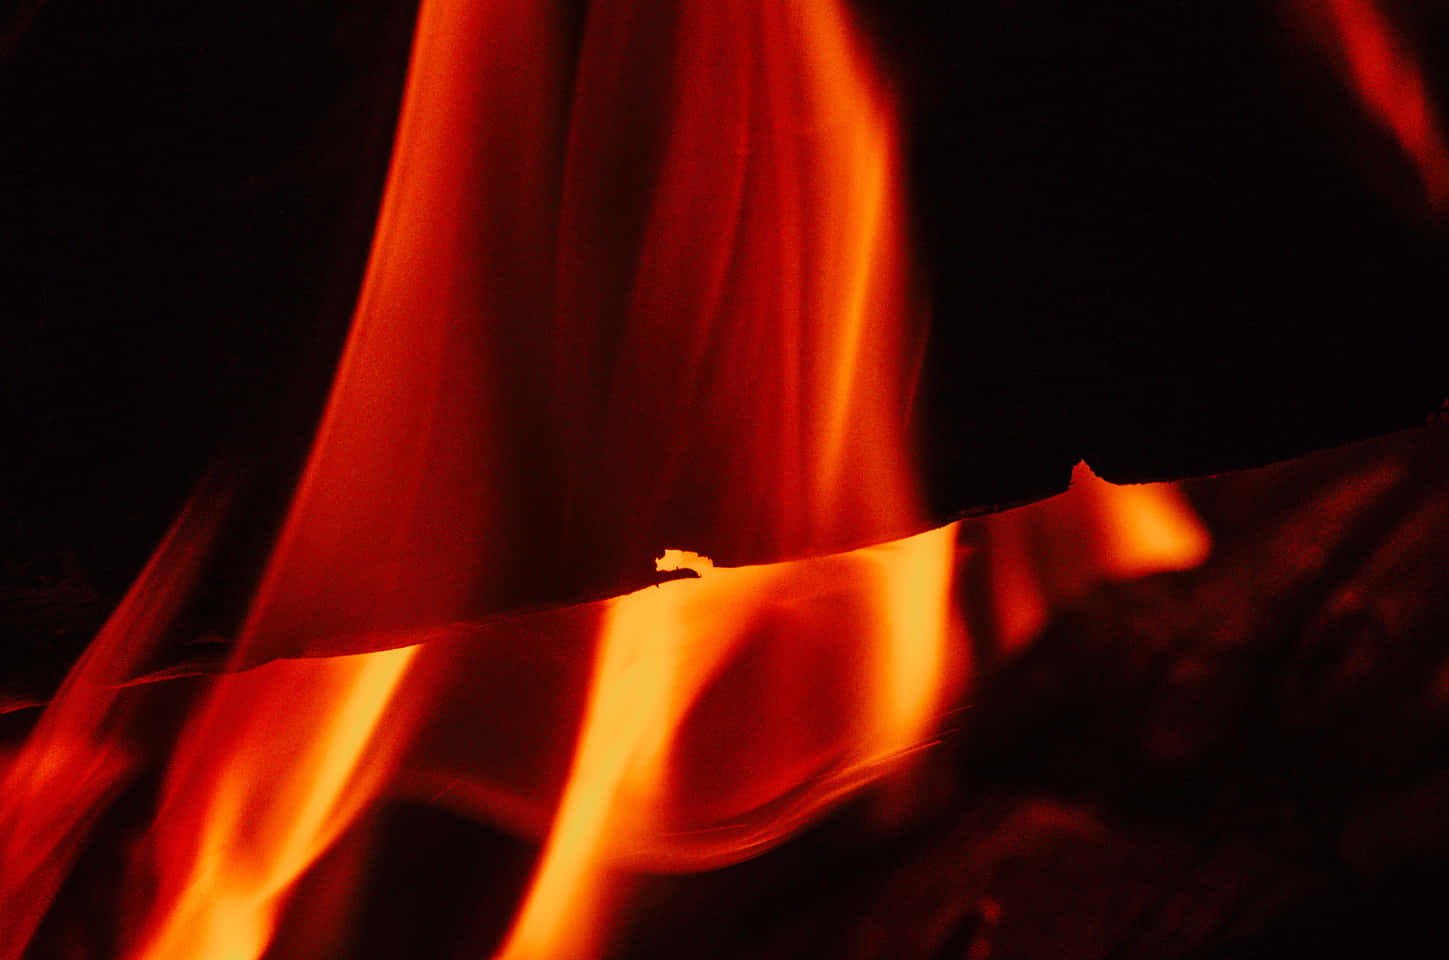 A Fire Burning In A Fireplace